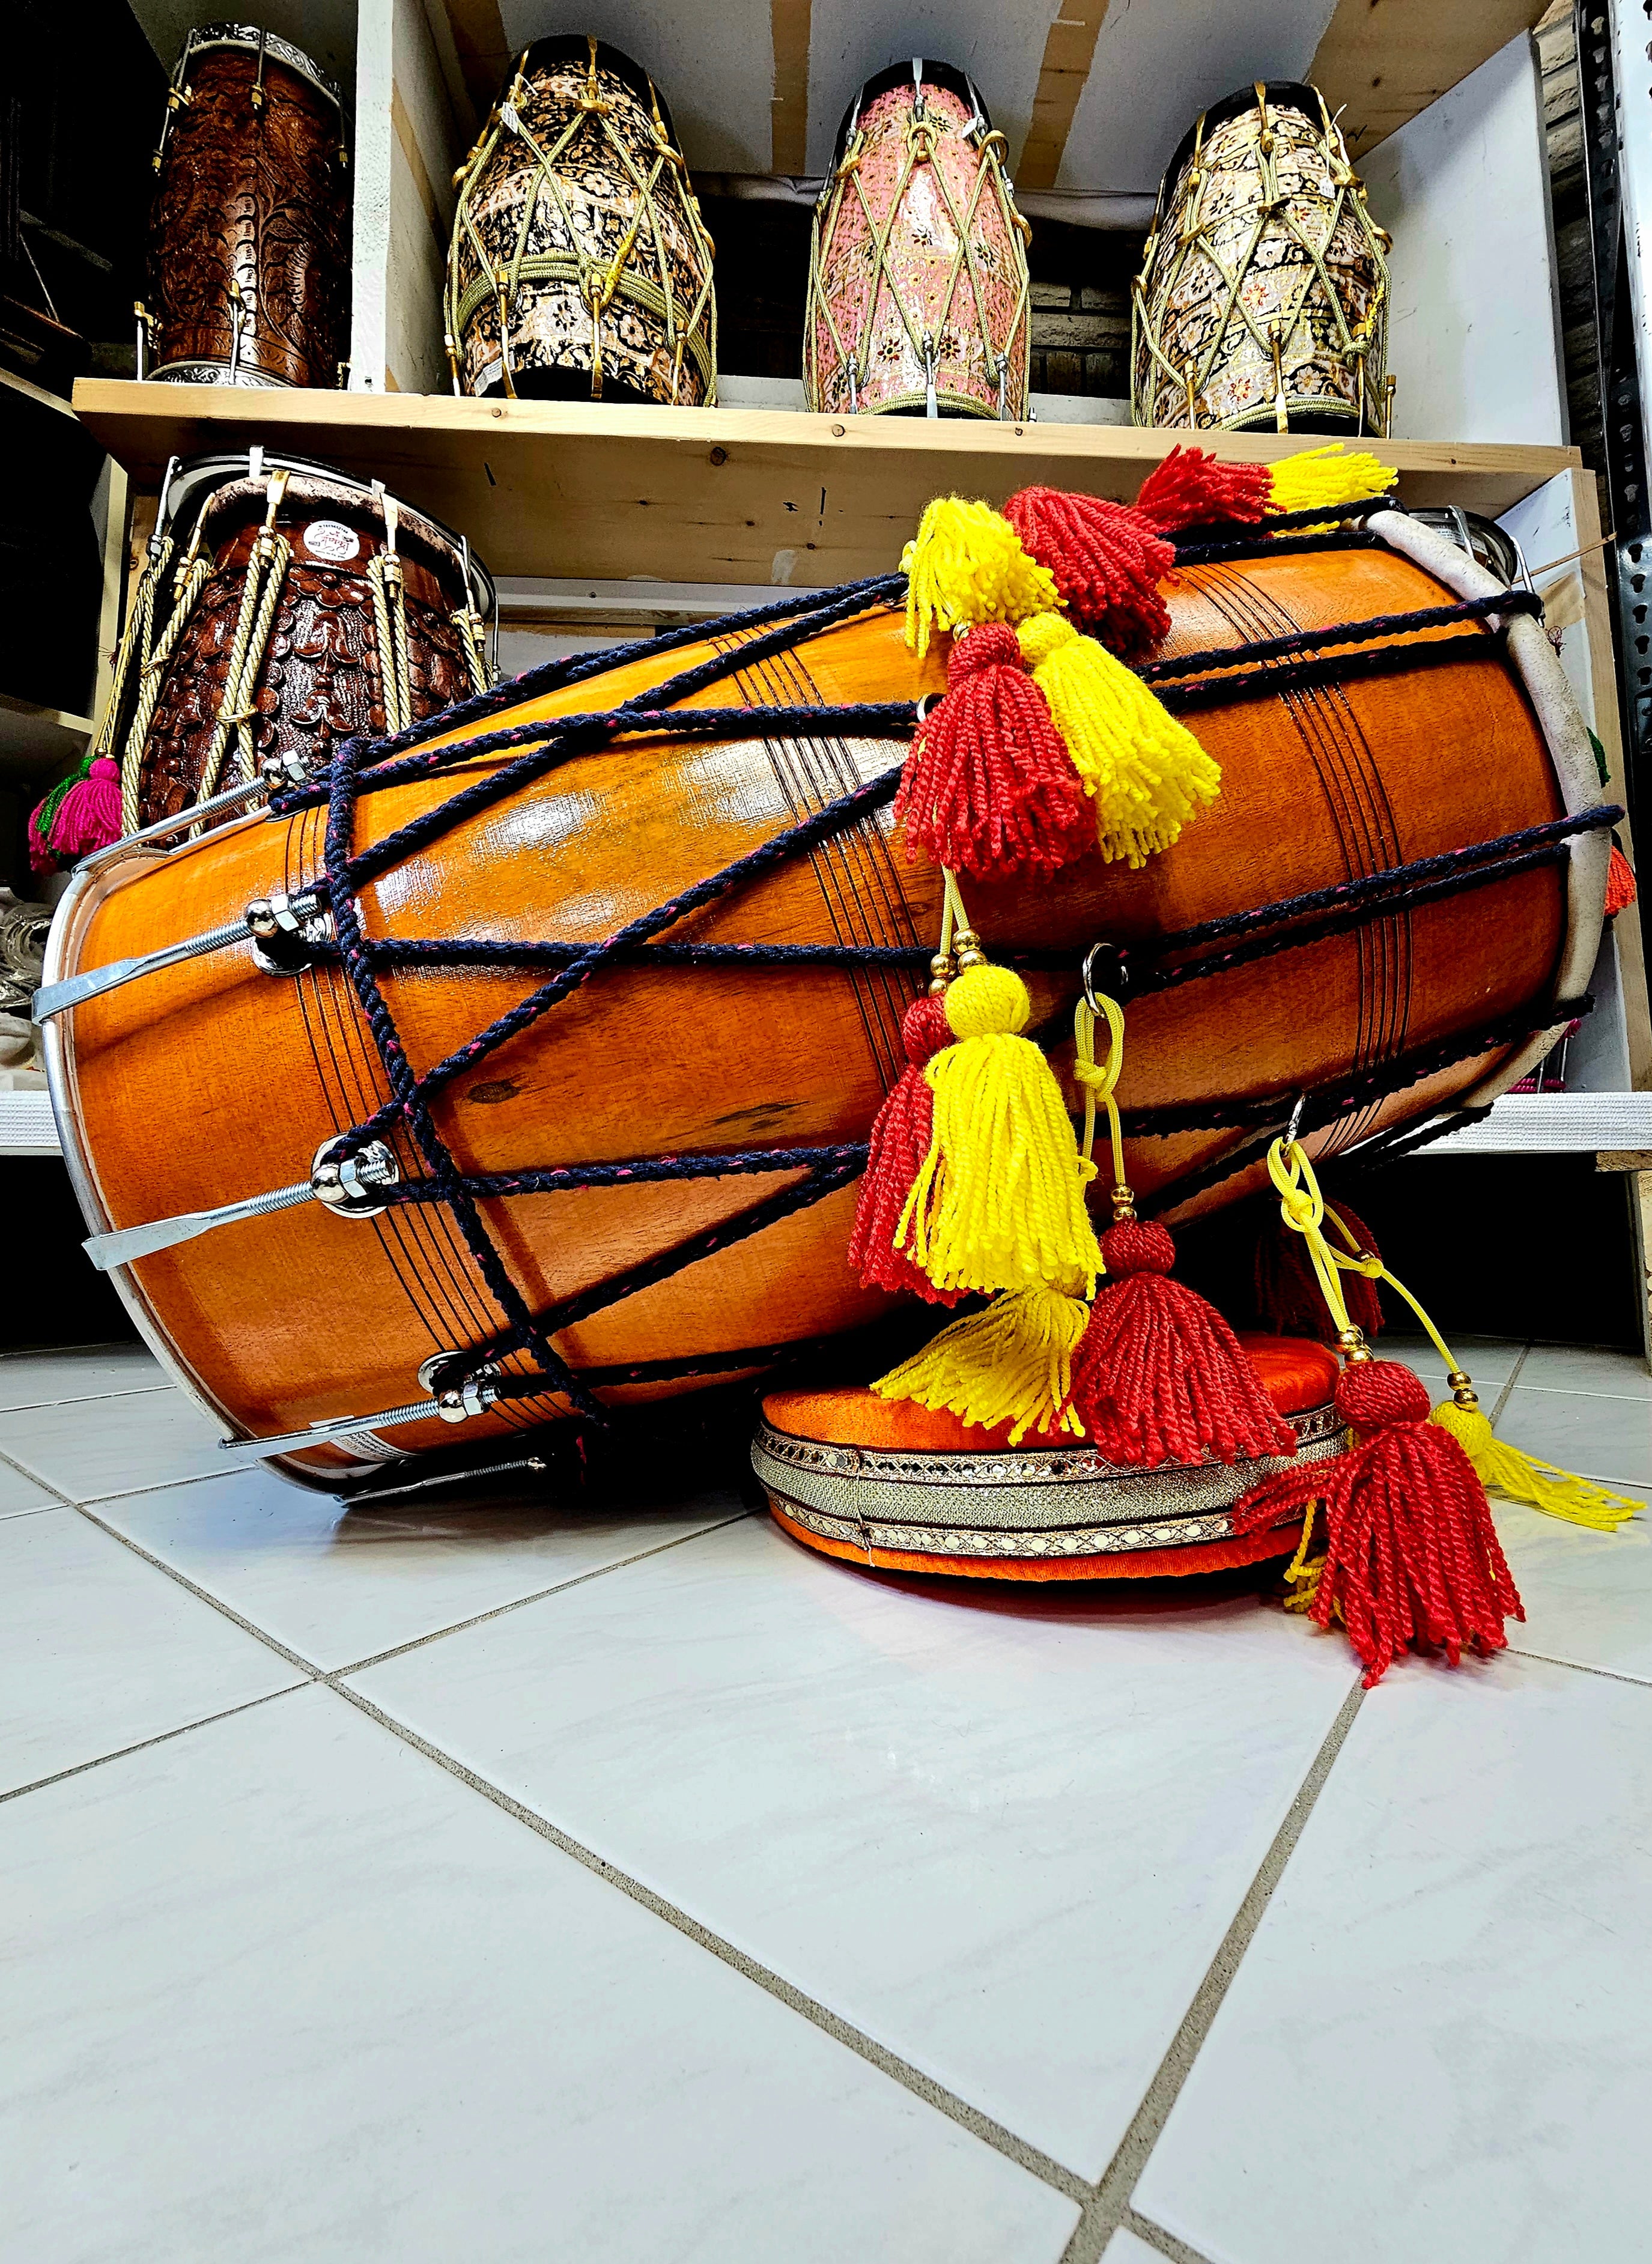 The Punjabi Fusion Pro Dhol - A Natural Mango Wood Dhol with Red and Yellow Tassels, Black Ropes, and Chrome Bolts!